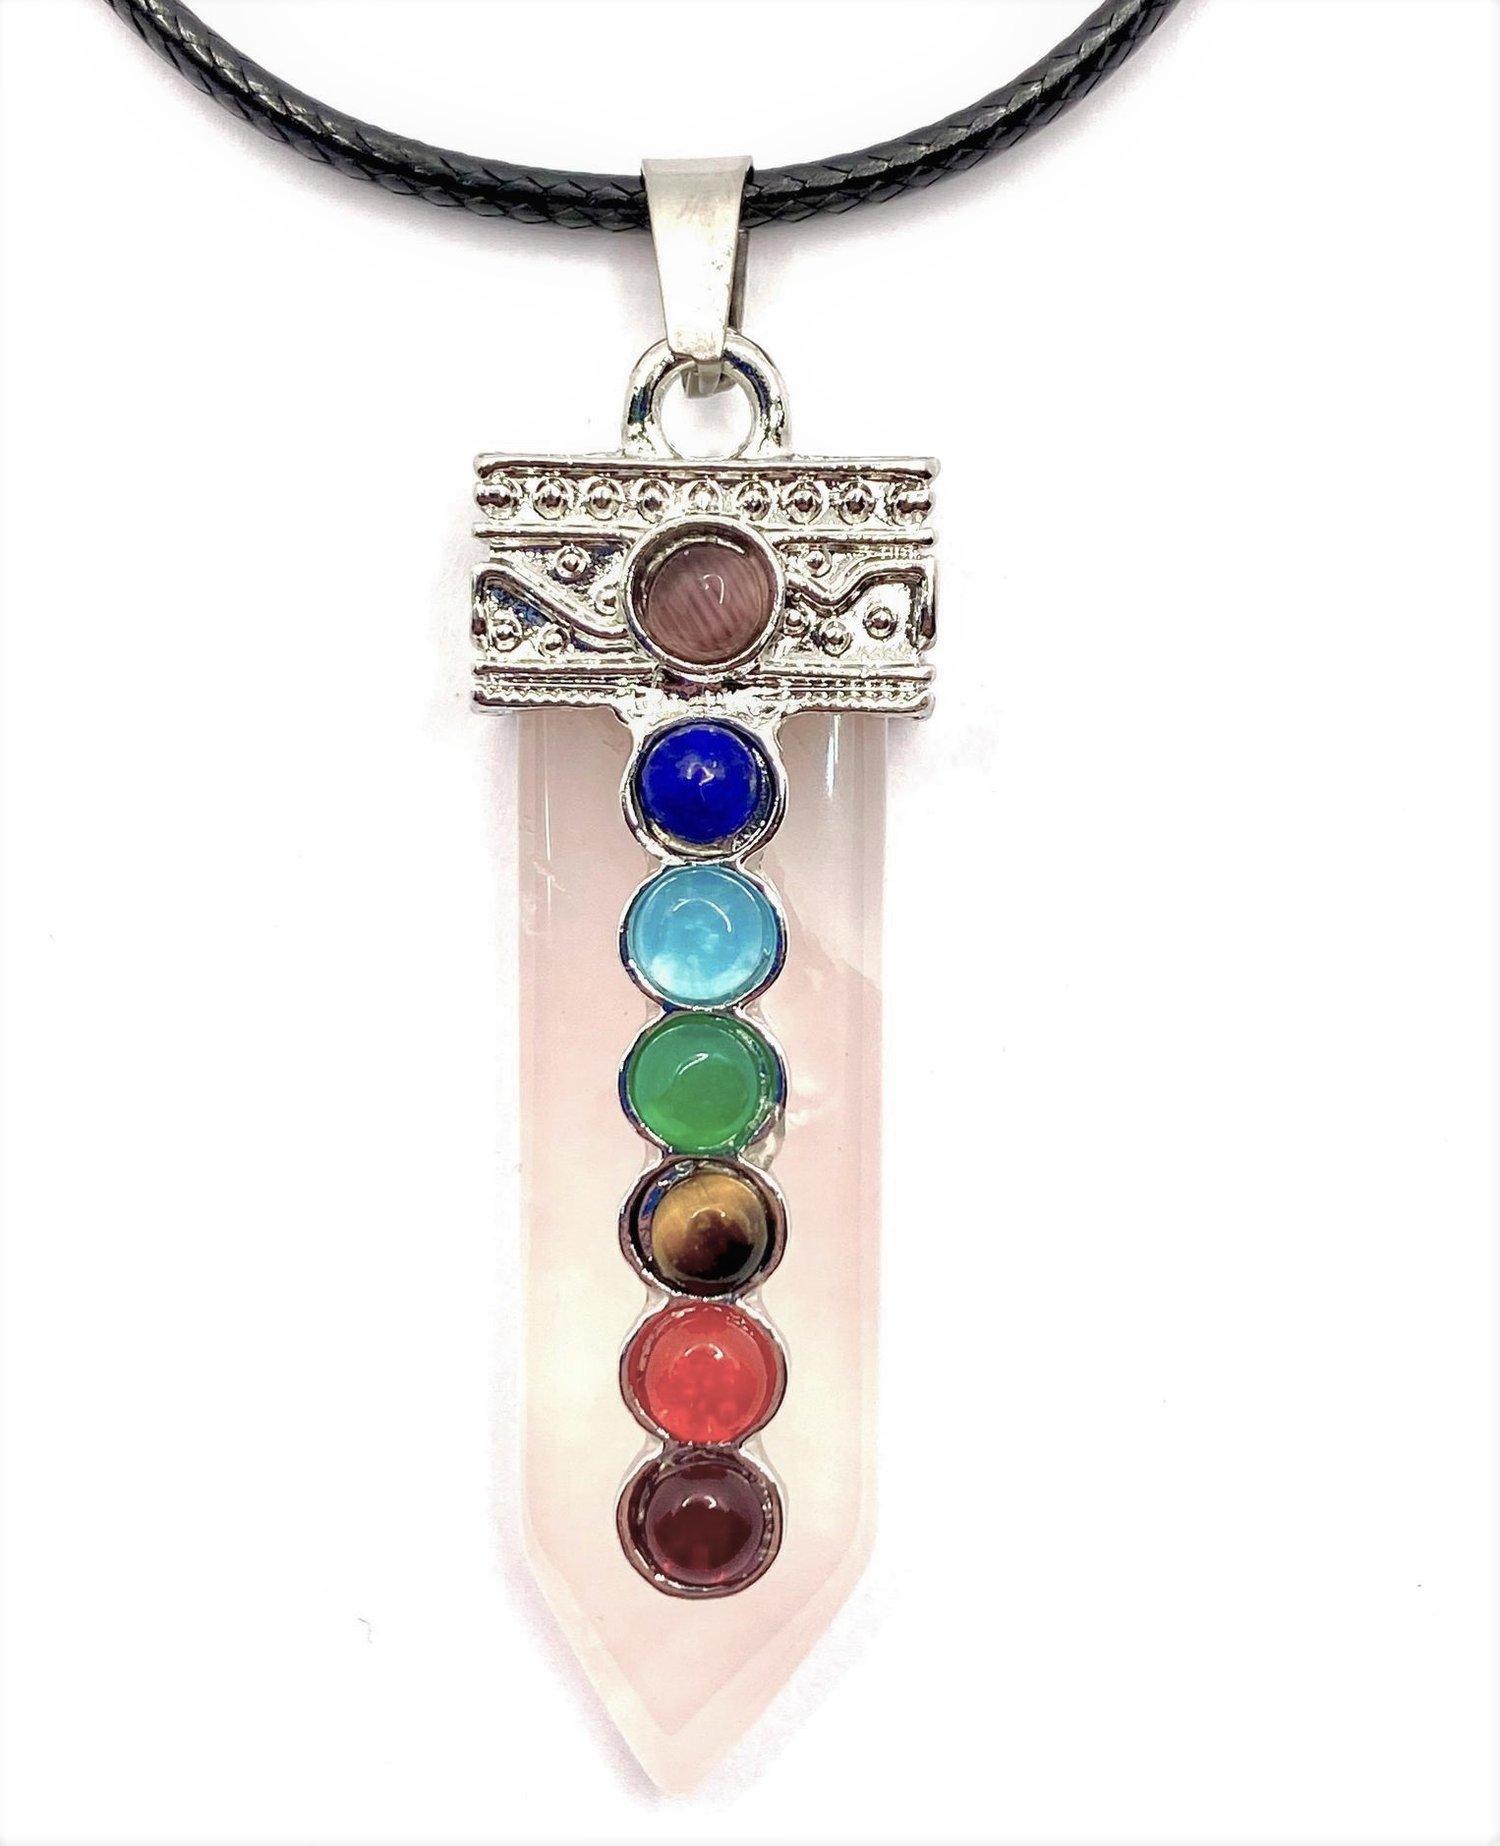 7 Chakras Necklace Gold - Gypsy Belles